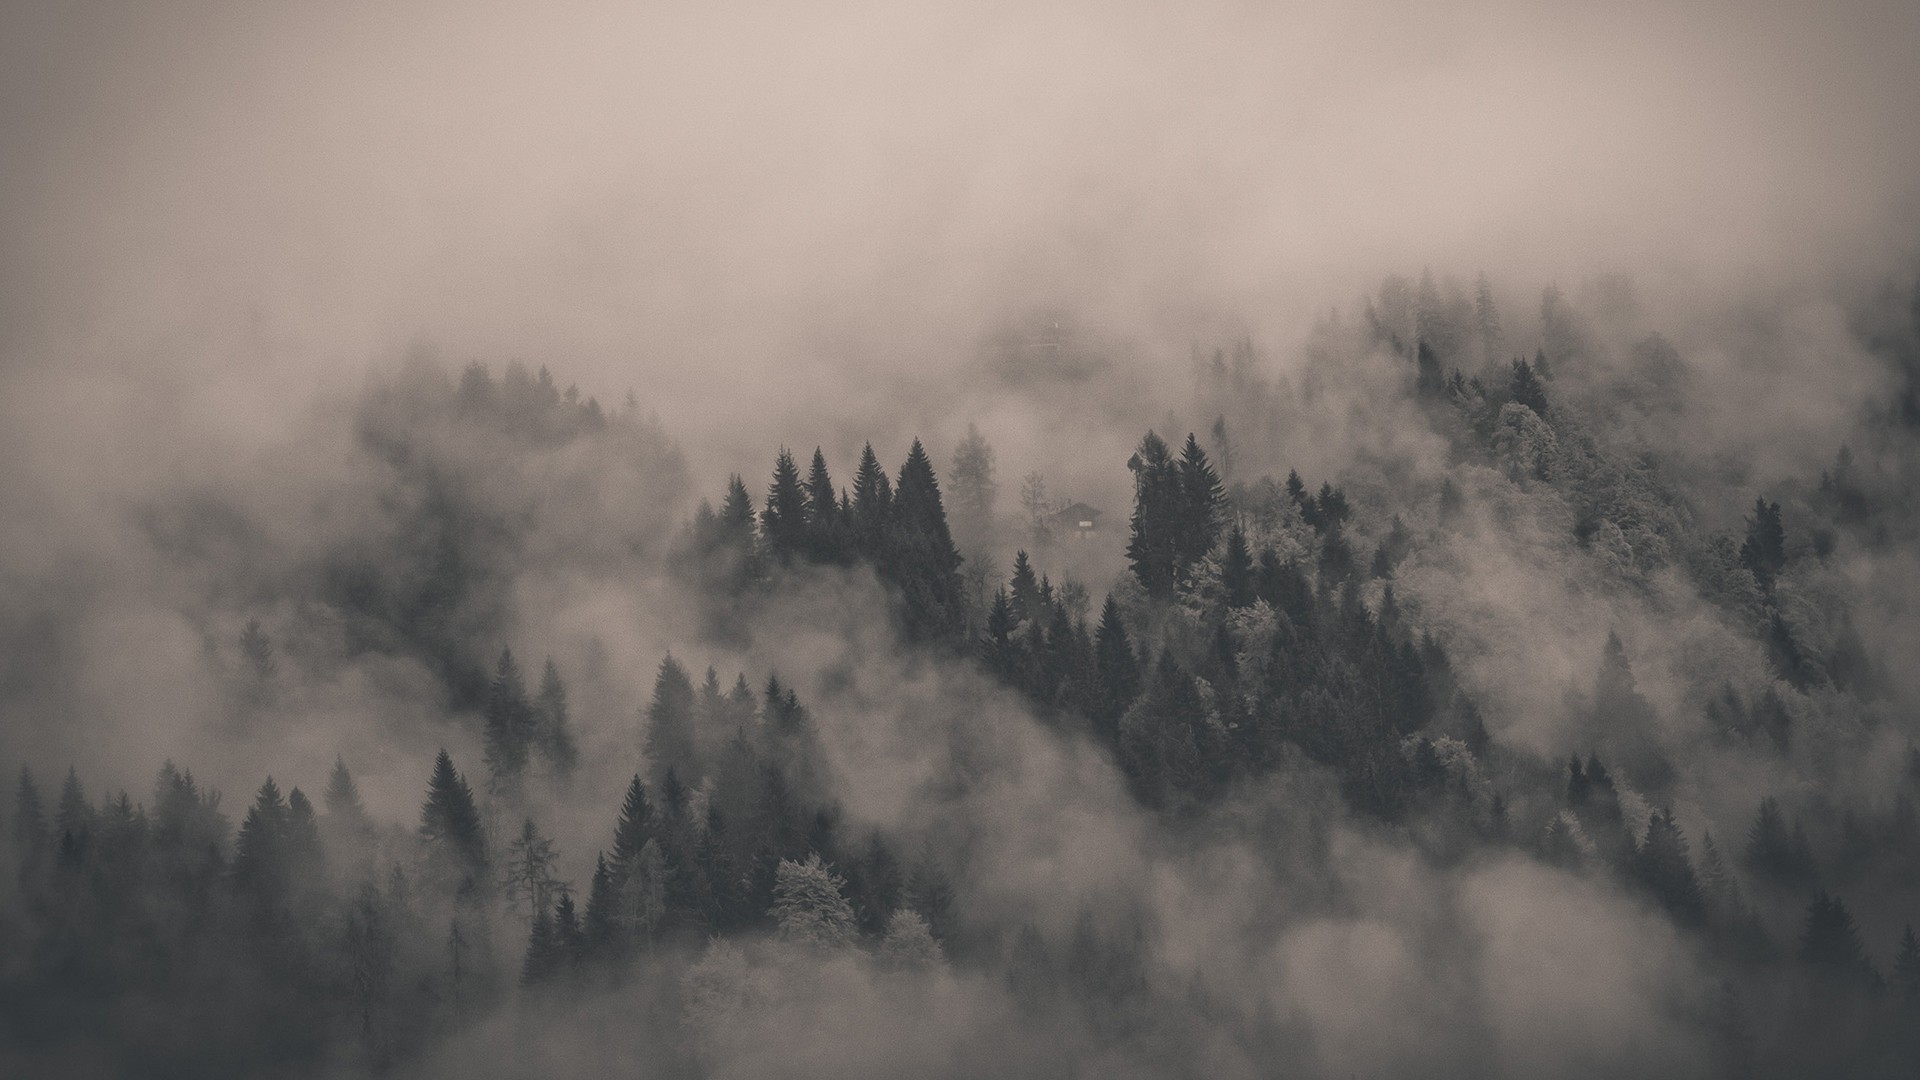 General 1920x1080 mist clouds trees dark landscape nature forest pine trees spruce cabin mountains sepia monochrome